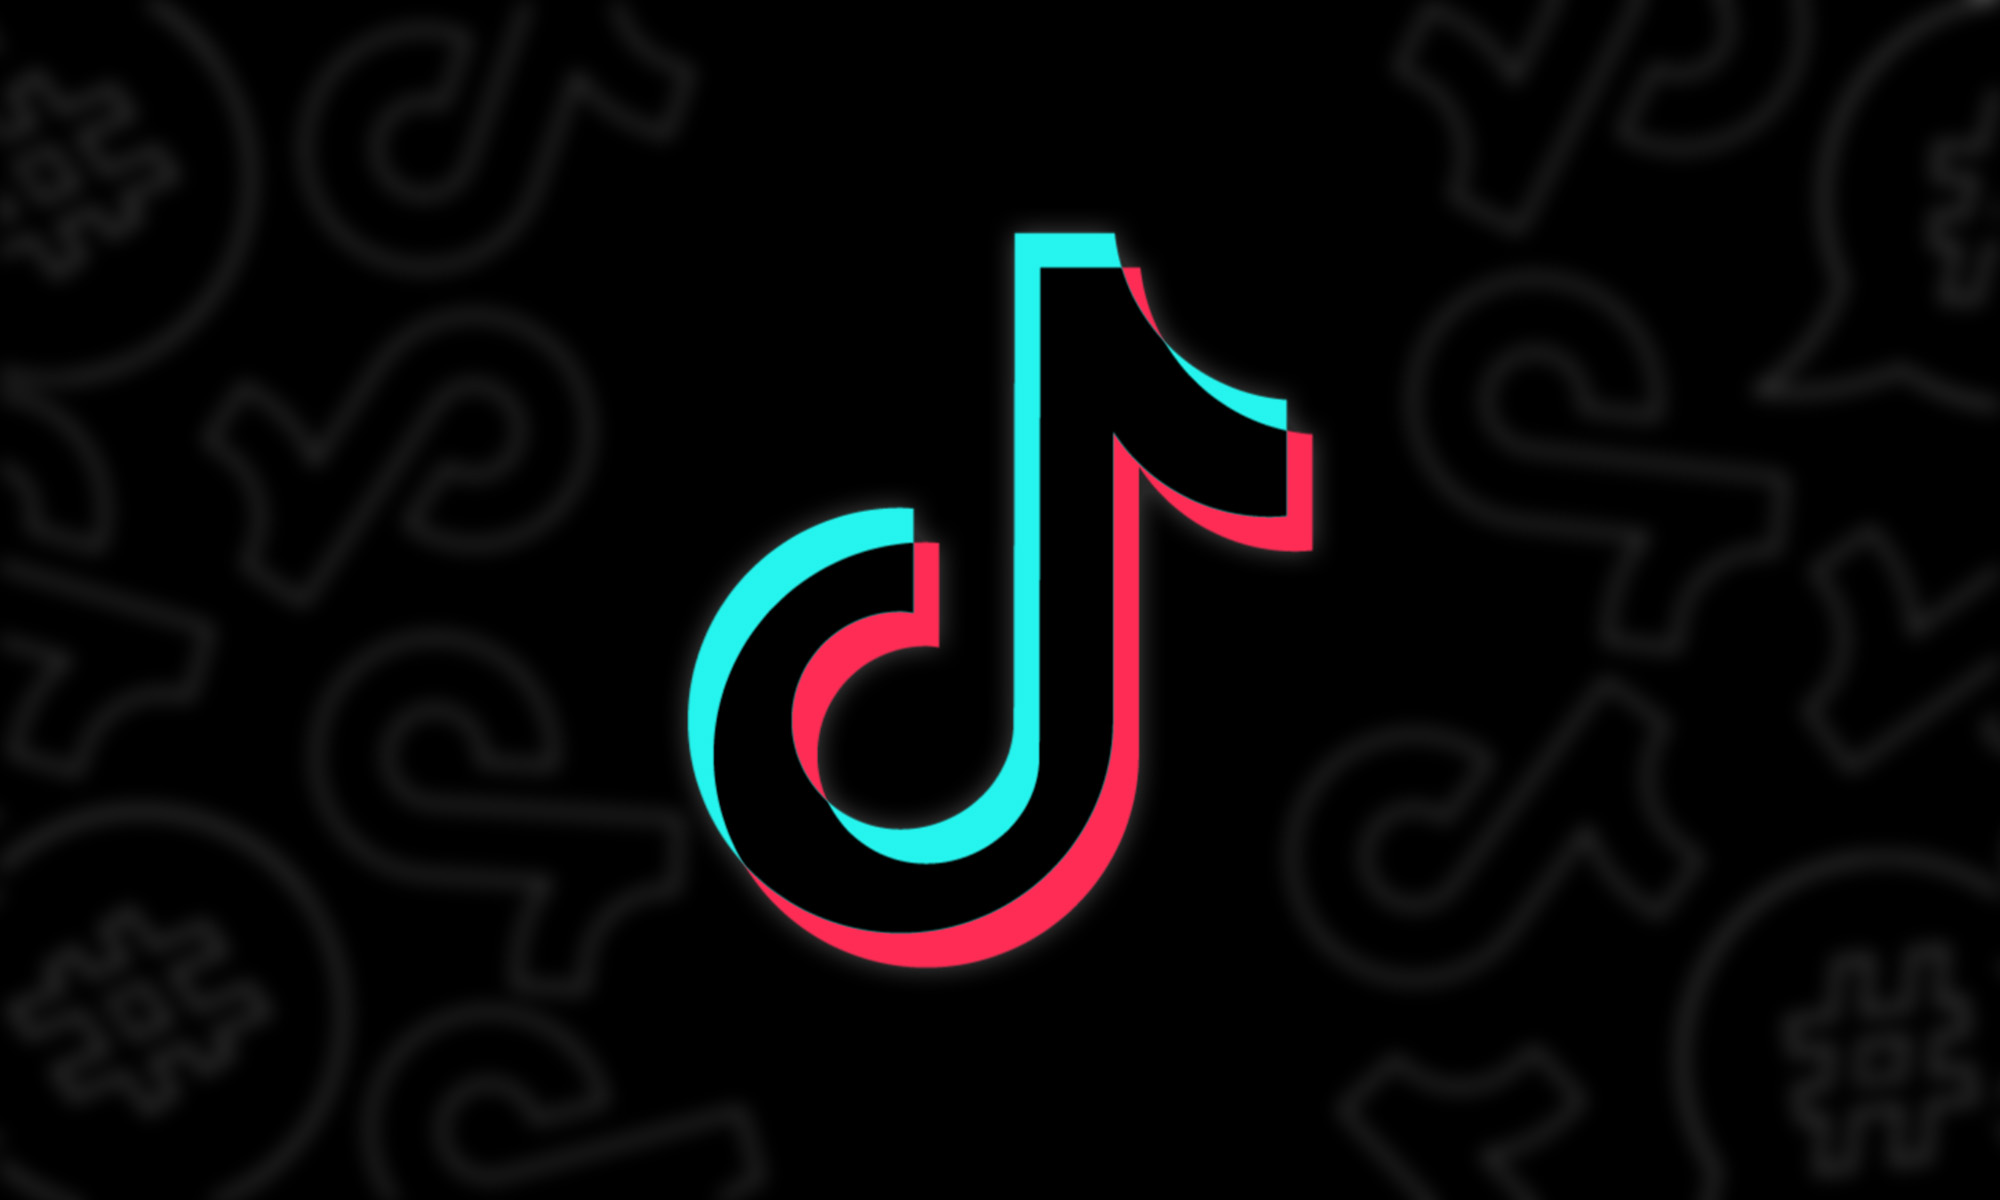 tiktok users can now upload up to 10 minutes long videos